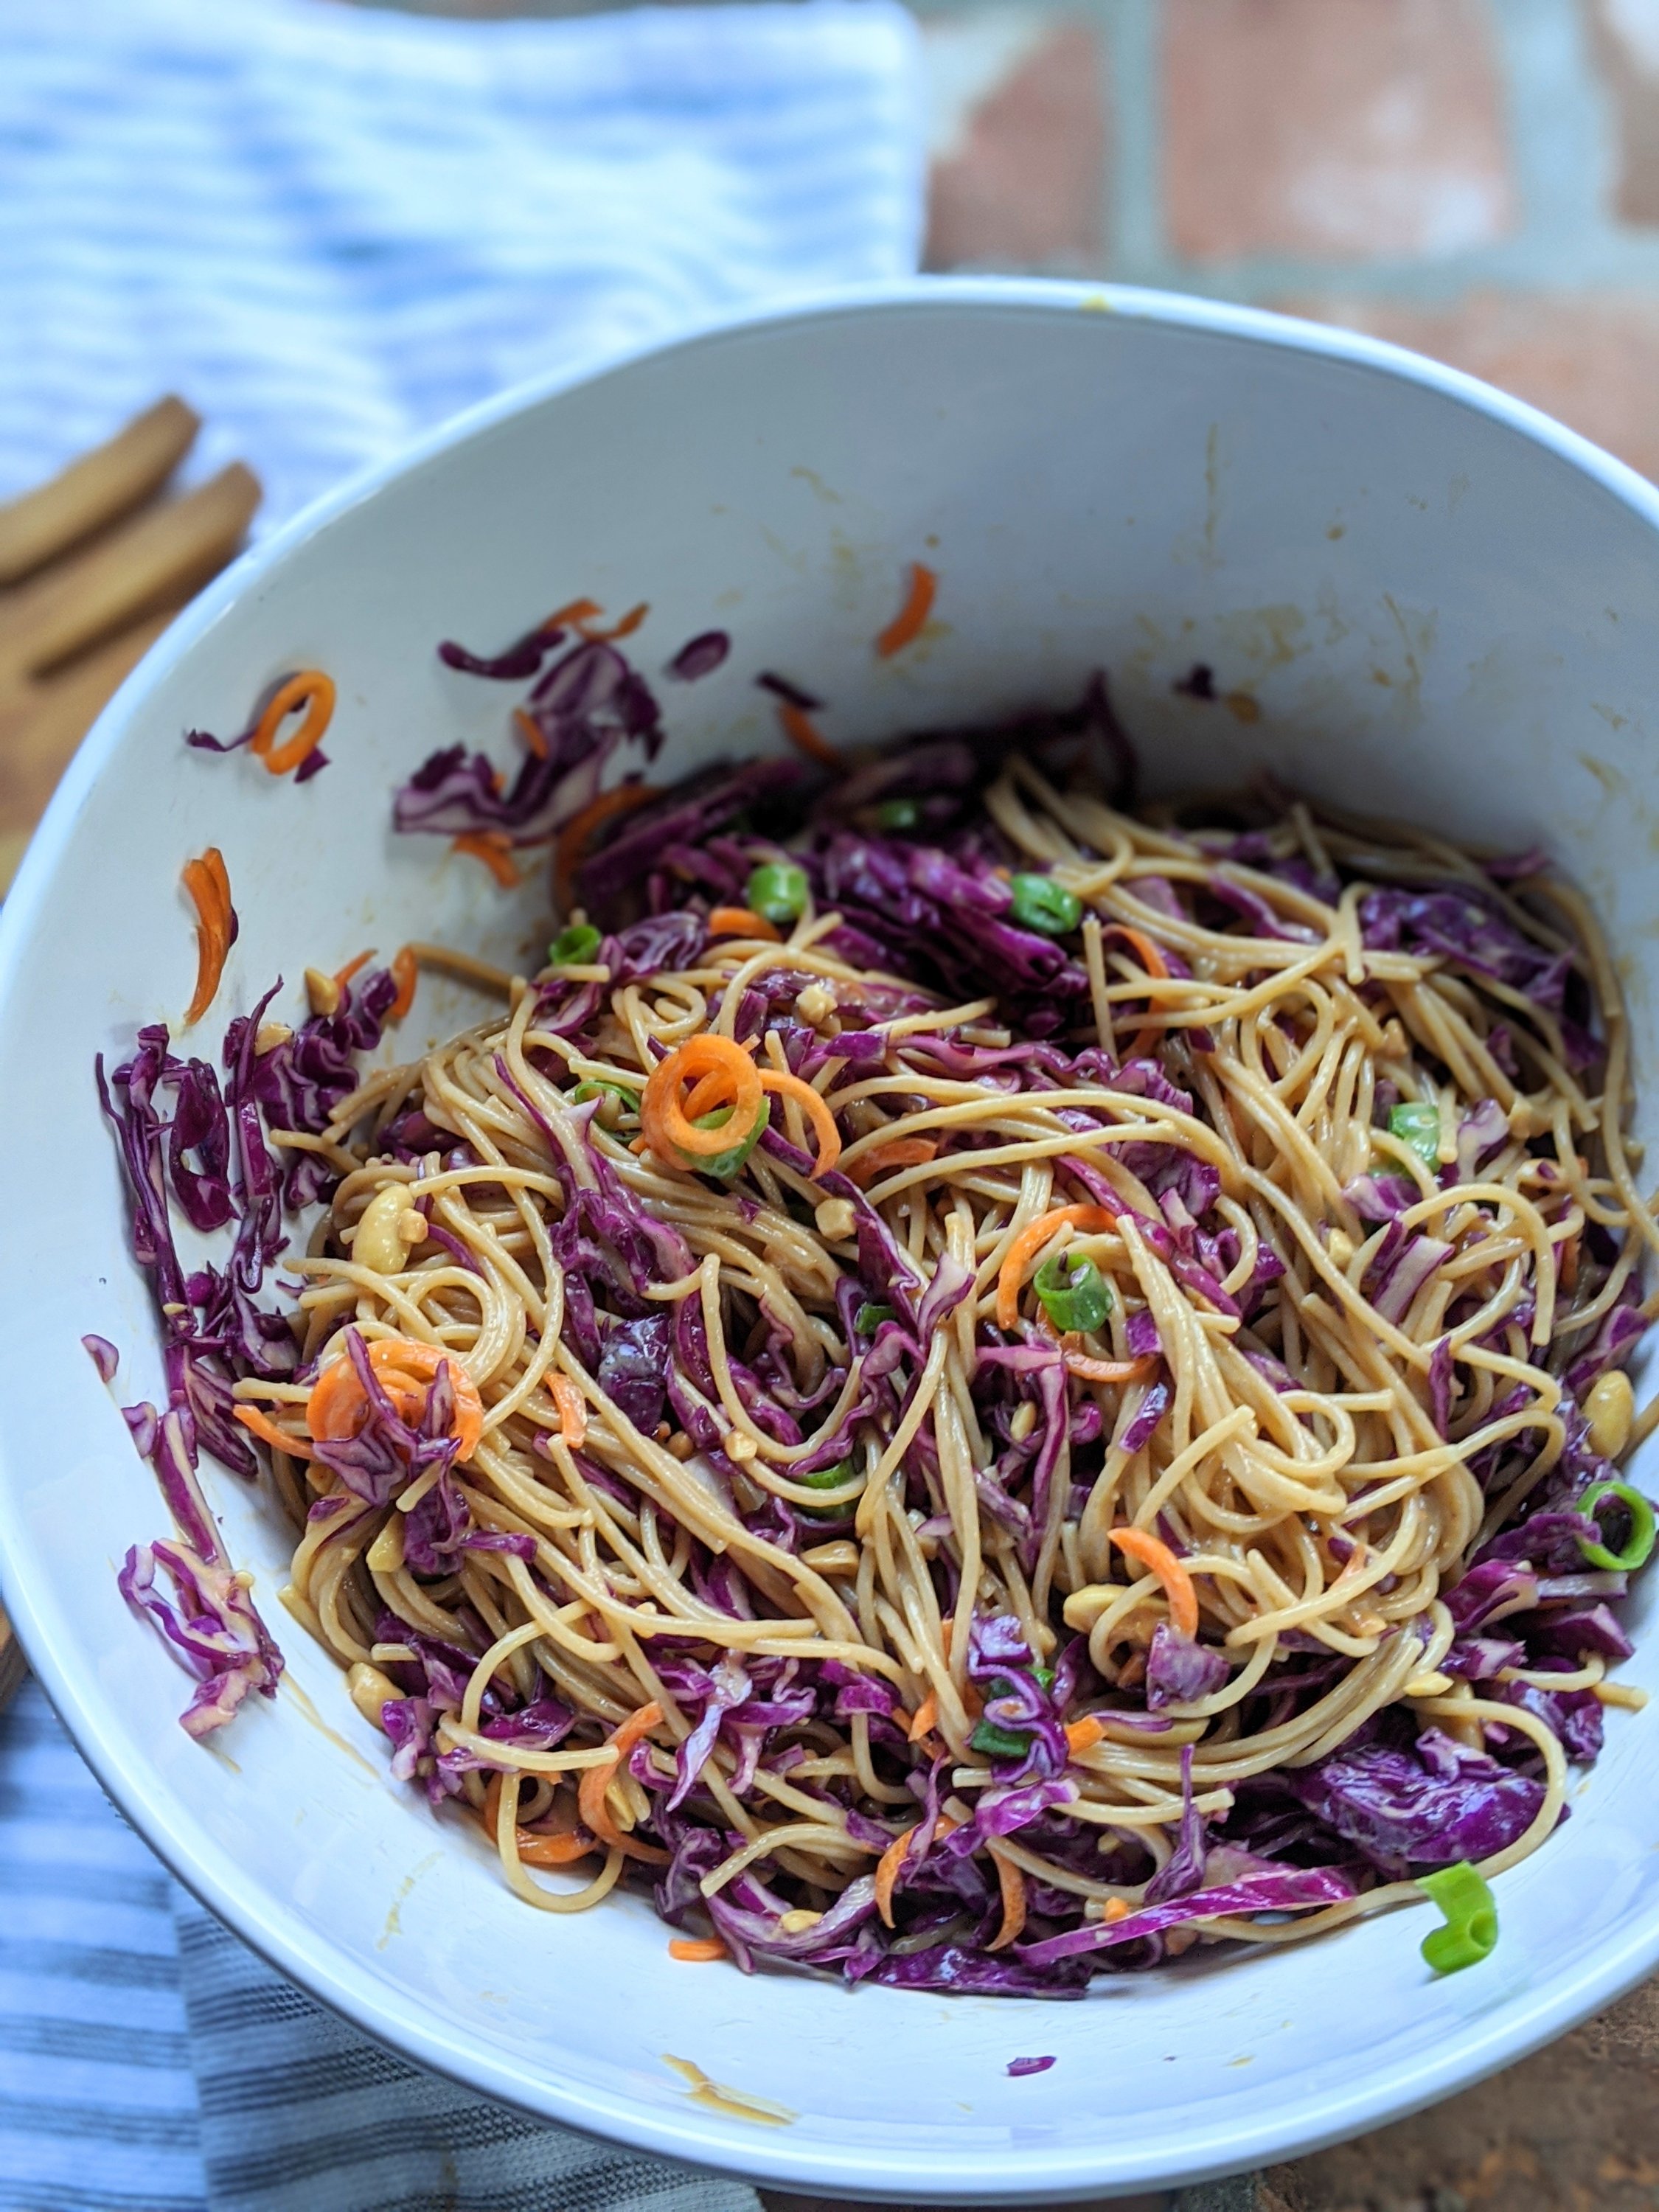 sweet and salty pasta salad recipe made with peanut sauce vegan gluten free vegetarian meatless side dishes pasta salad recipes asian for a crowd rice noodle or asian spaghetti salad reipe